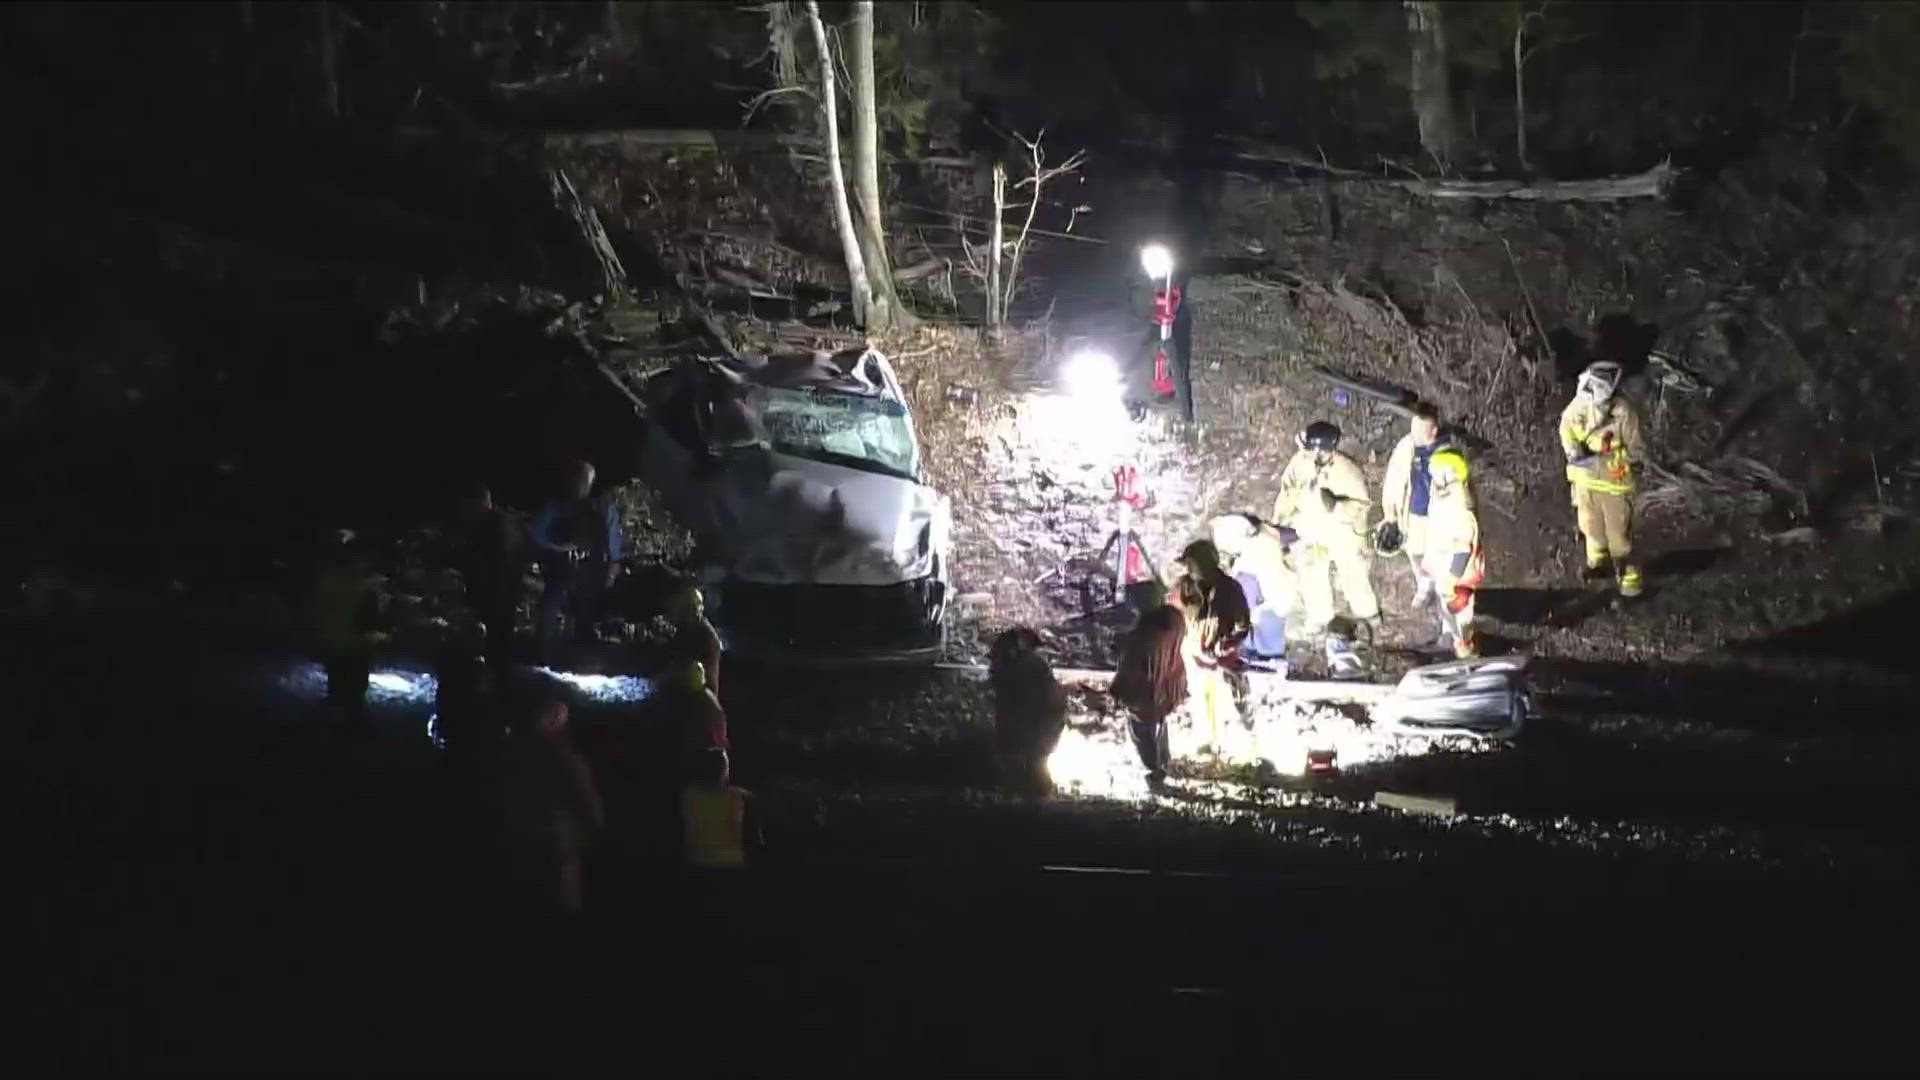 Police say a portion of a roadway in Prince William County will be closed for several hours following a crash involving a train and a truck Monday night.